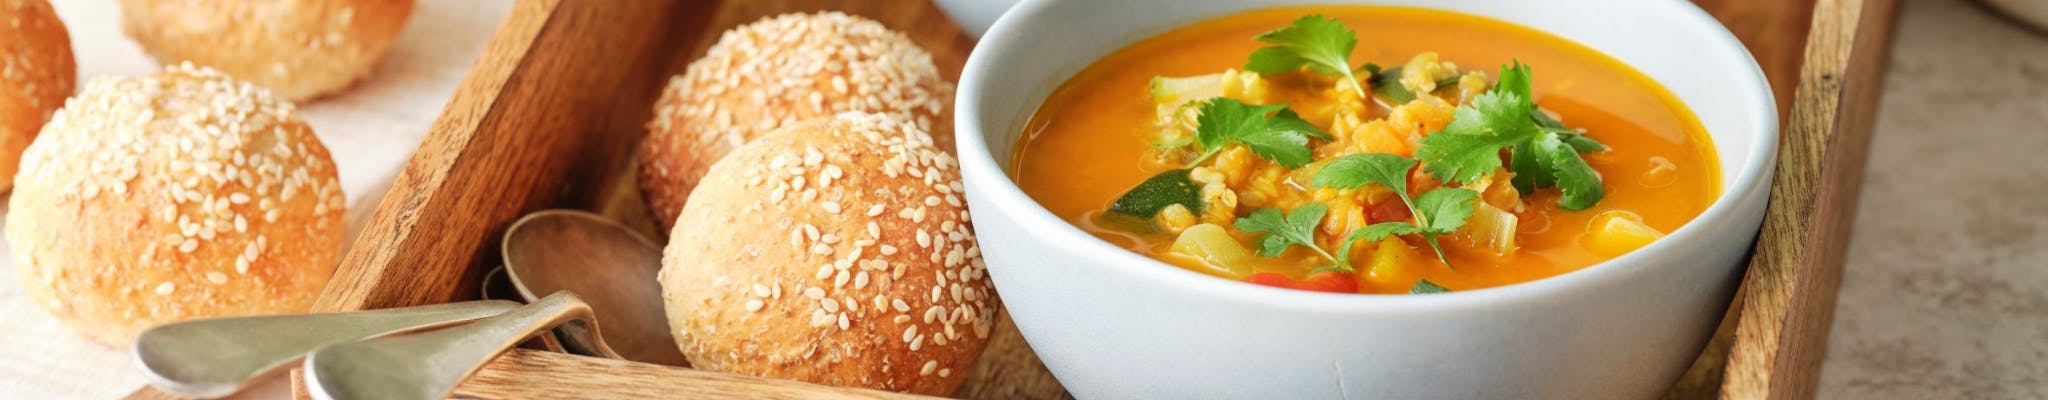 Two bowls of soup with bread ro